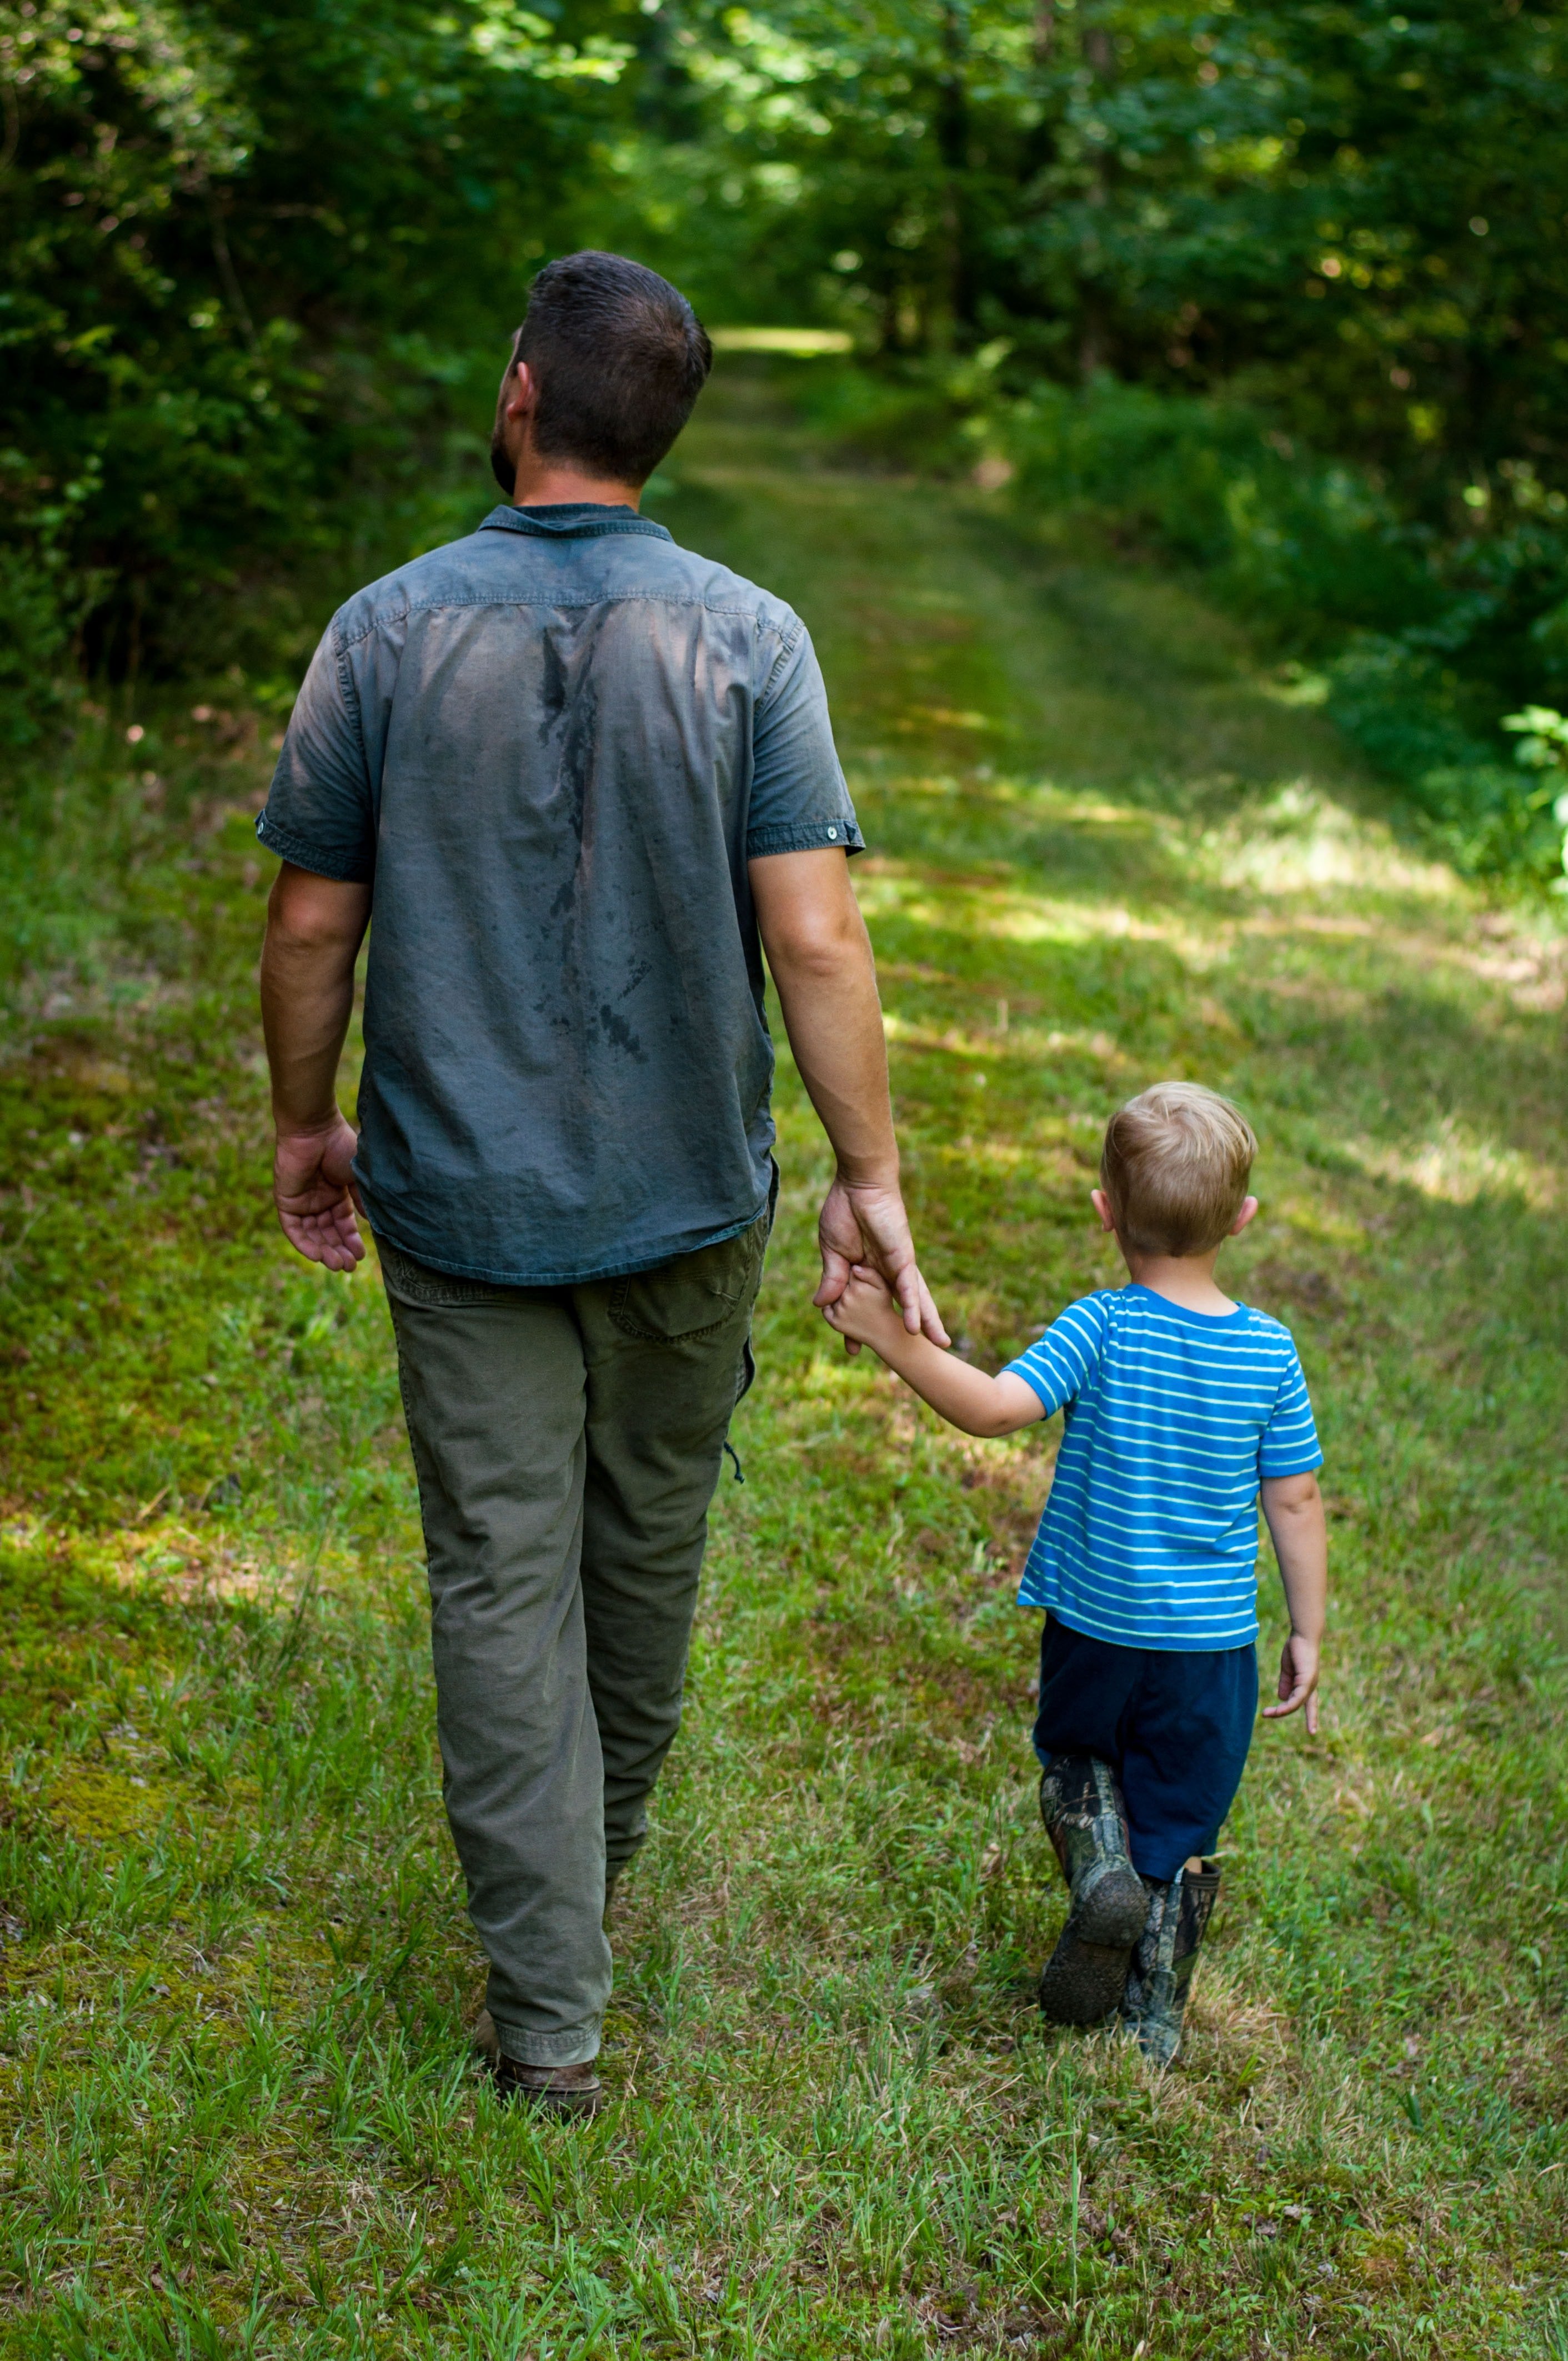 Simon was reunited with his son. | Source: Unsplash